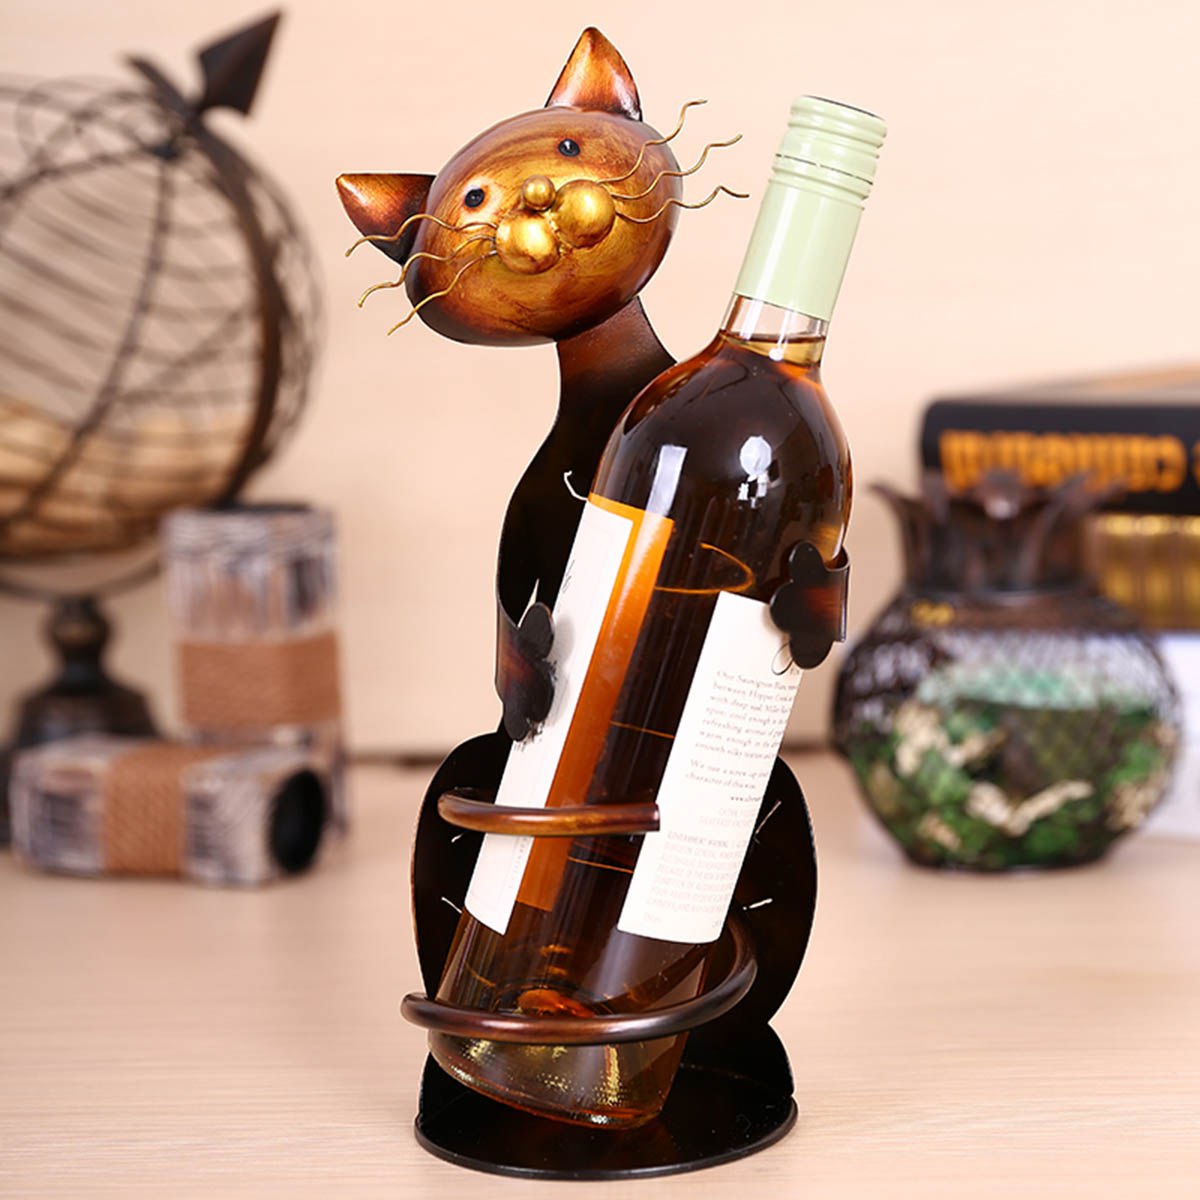 wine bottle stand options ideas